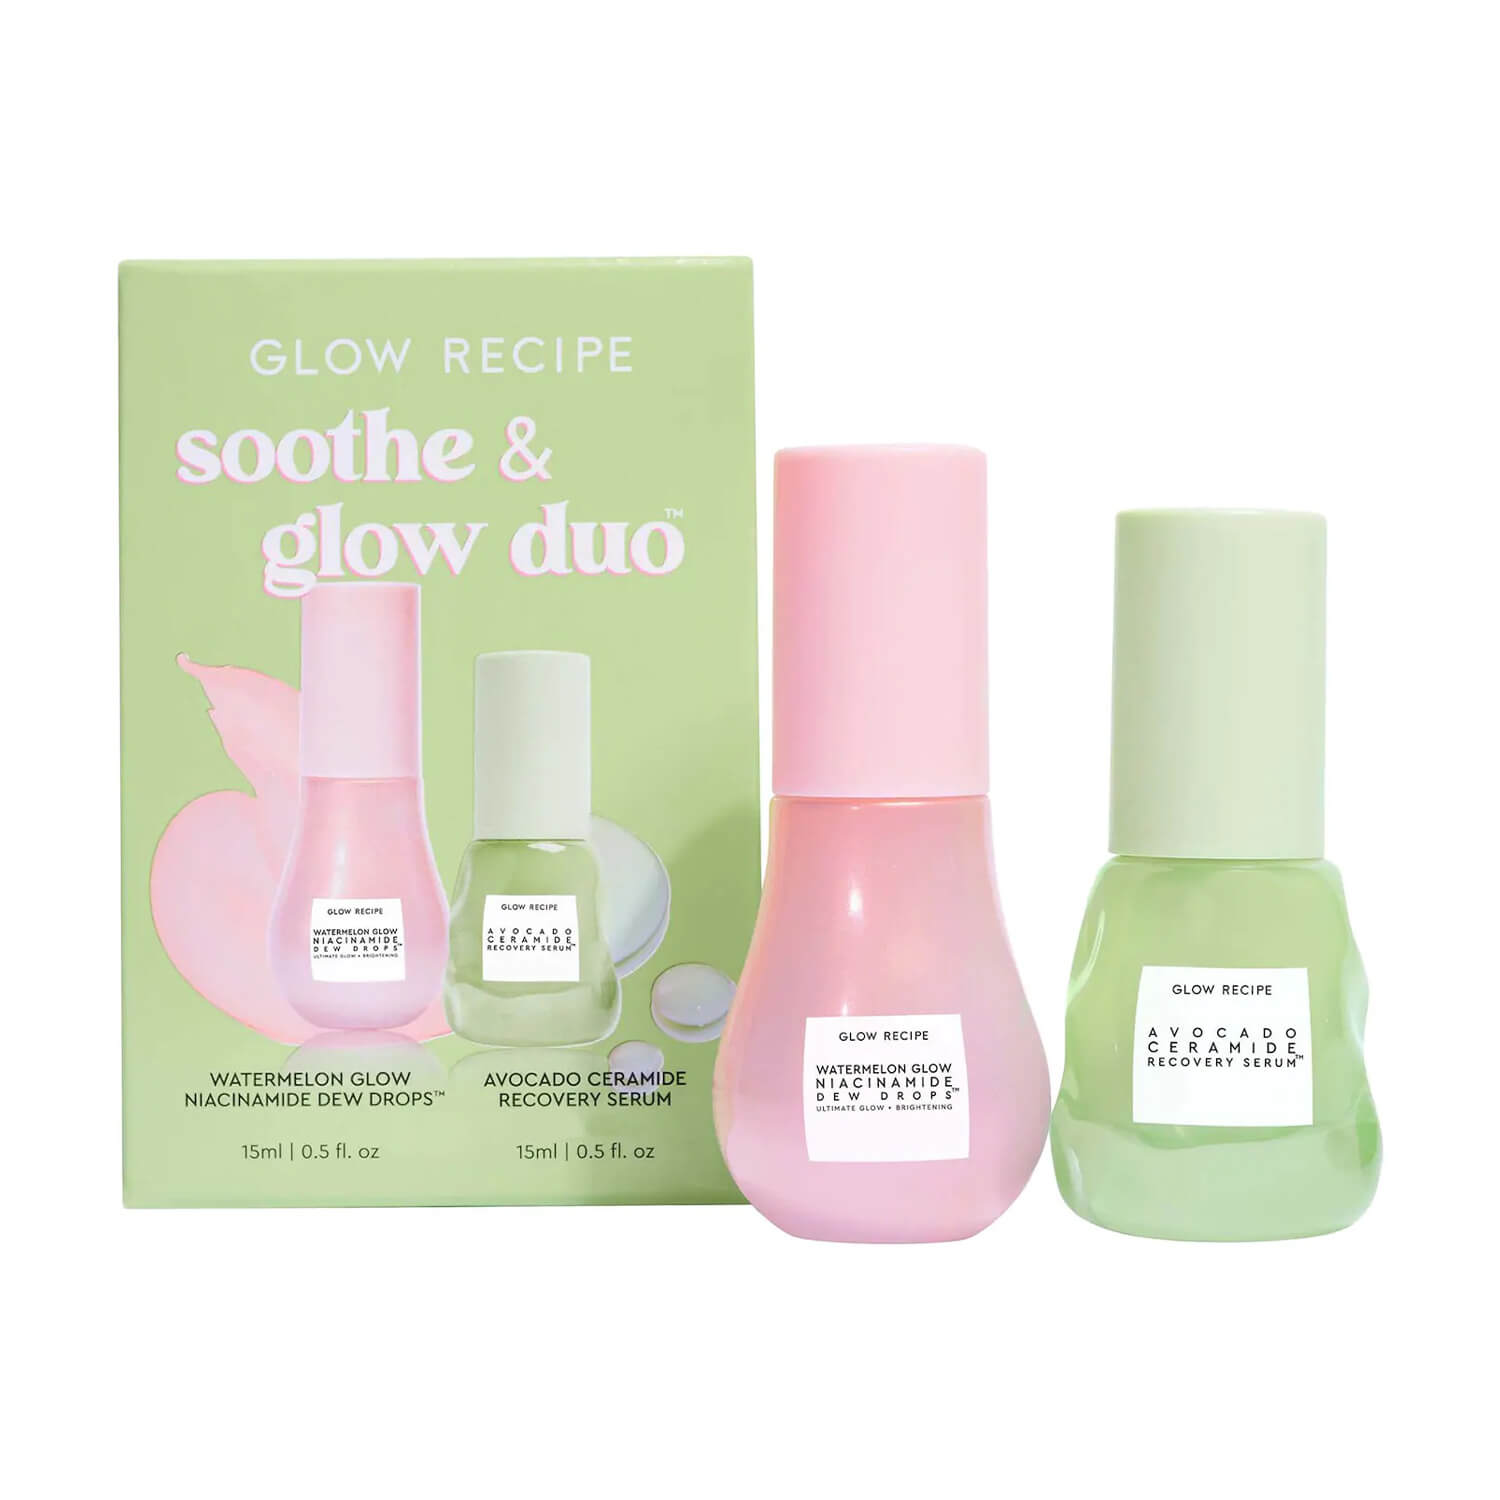 shop glow recipe skincare glow set available at heygirl.pk for delivery in Pakistan